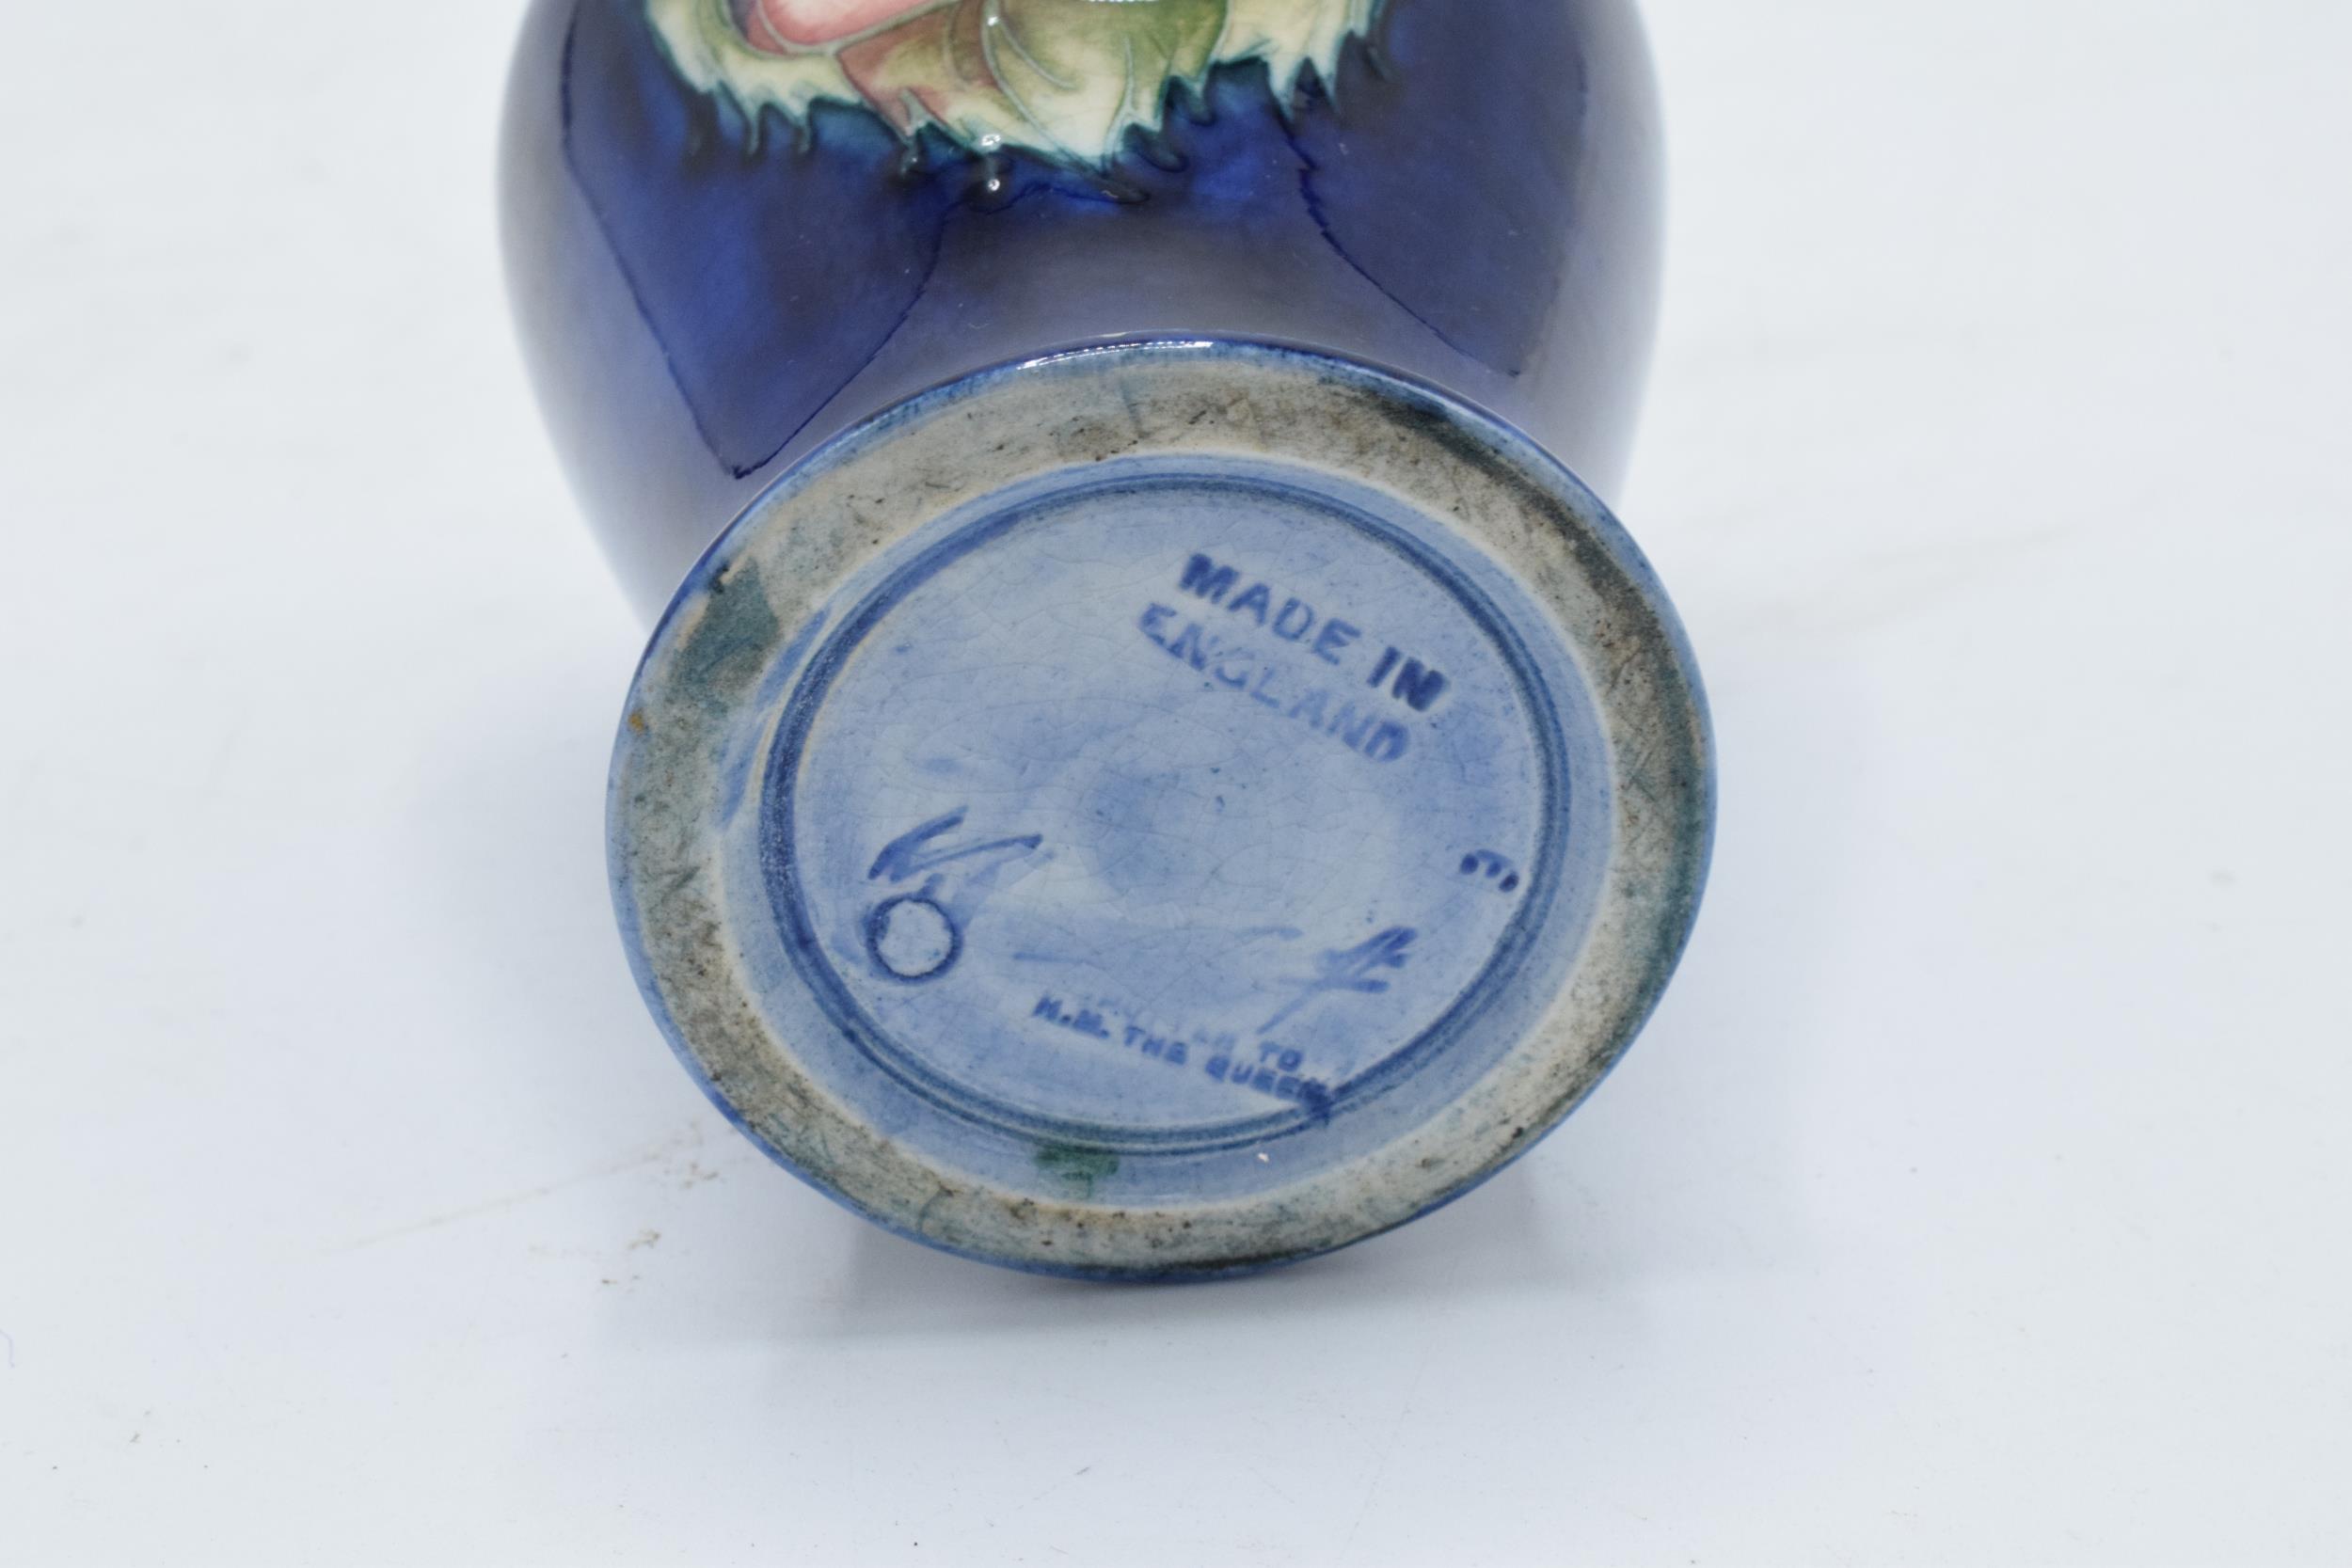 Moorcroft small Pansy vase. 9.5cm tall. In good condition with no obvious damage or restoration. - Image 3 of 3